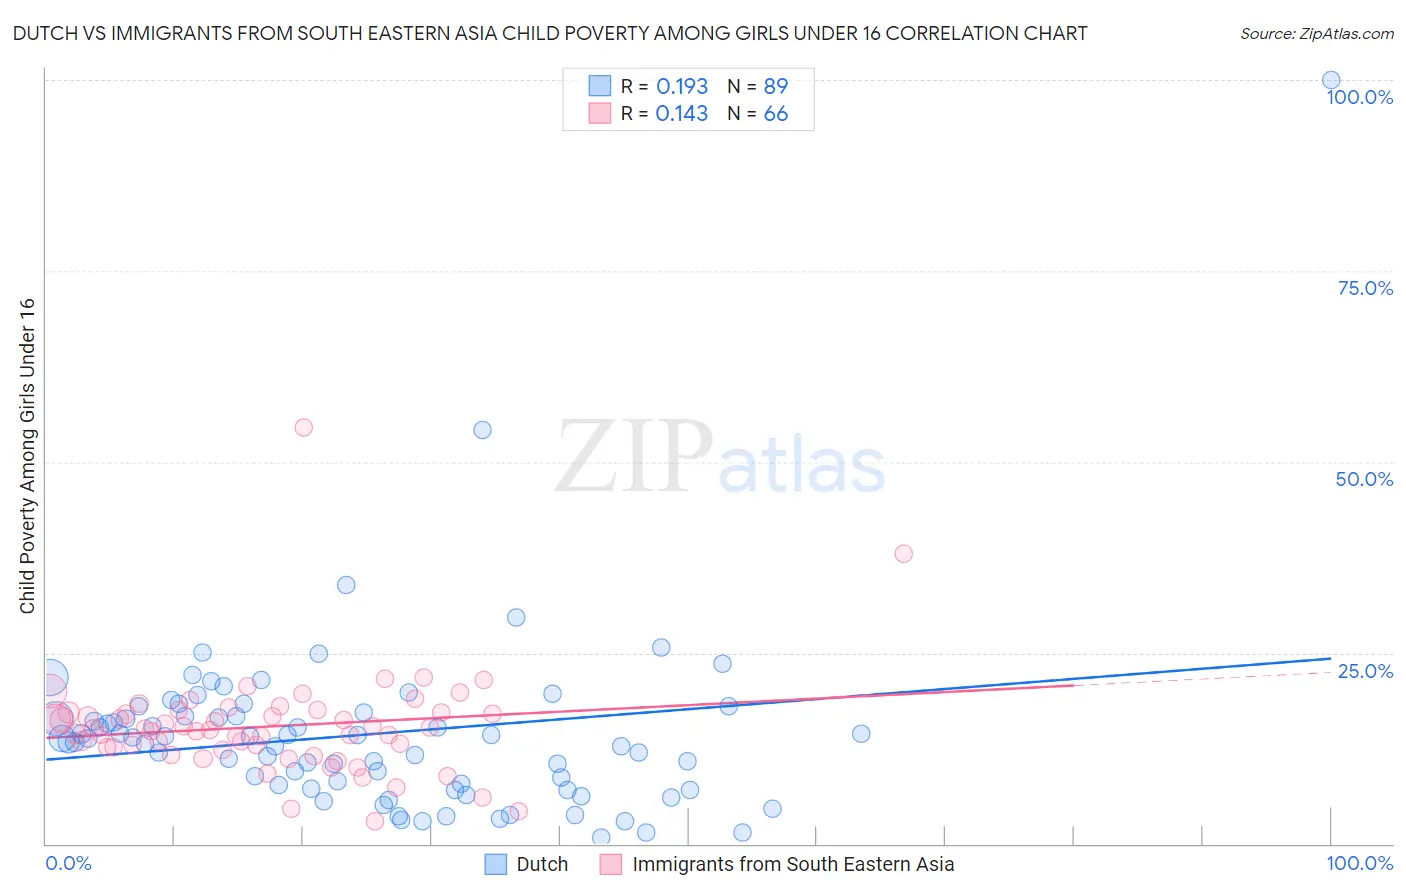 Dutch vs Immigrants from South Eastern Asia Child Poverty Among Girls Under 16